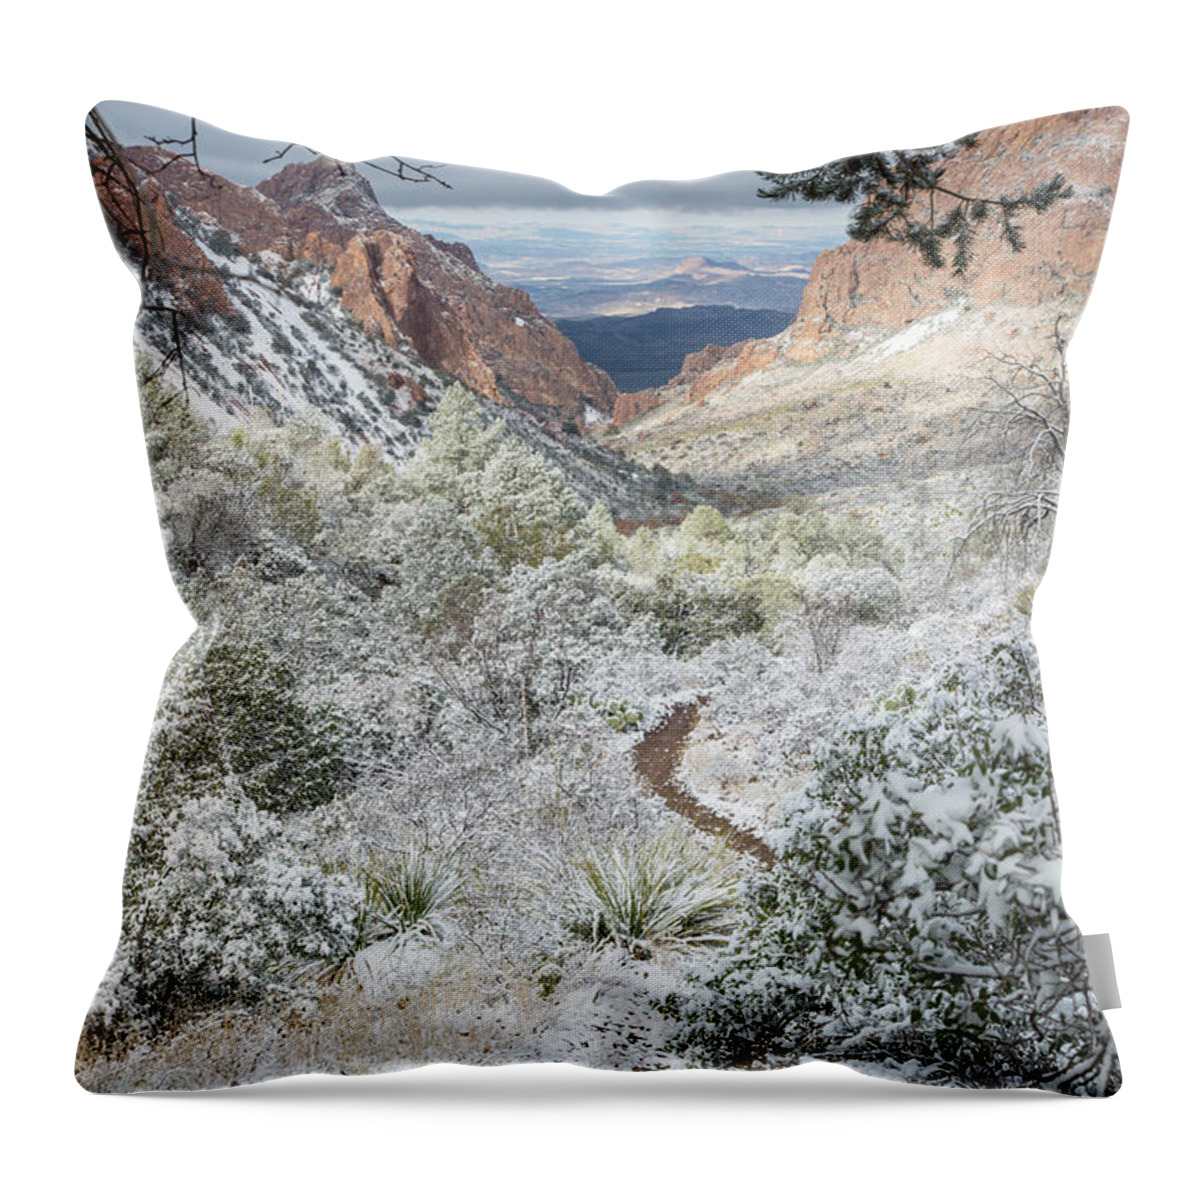 Snow Throw Pillow featuring the photograph Big Bend Window With Snow by Kathy Adams Clark